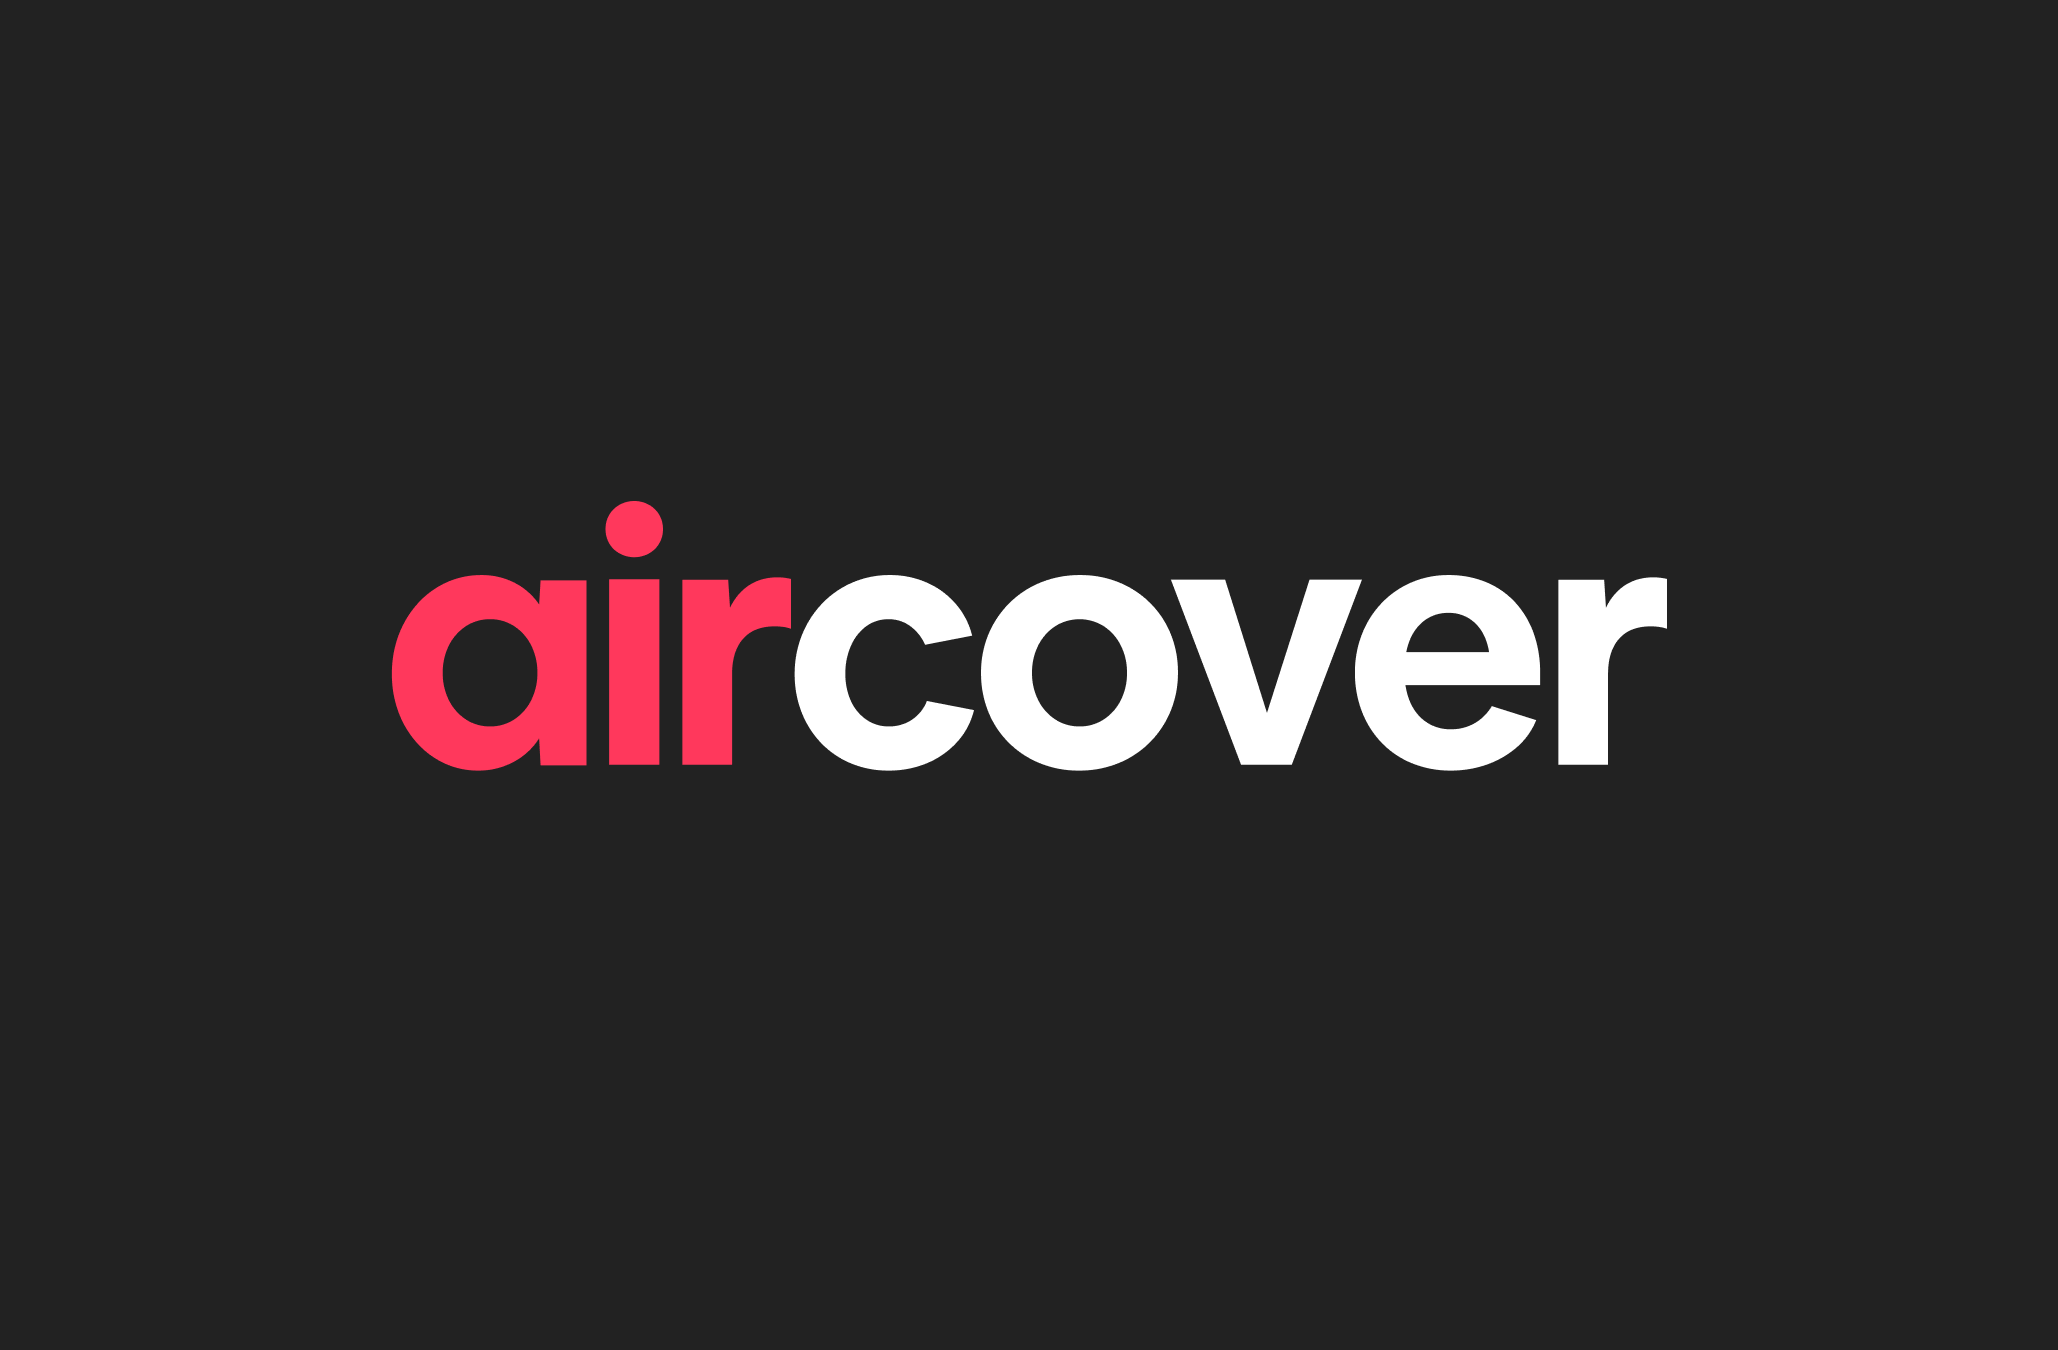 The logo for AirCover, in red and white letters, on a black background.